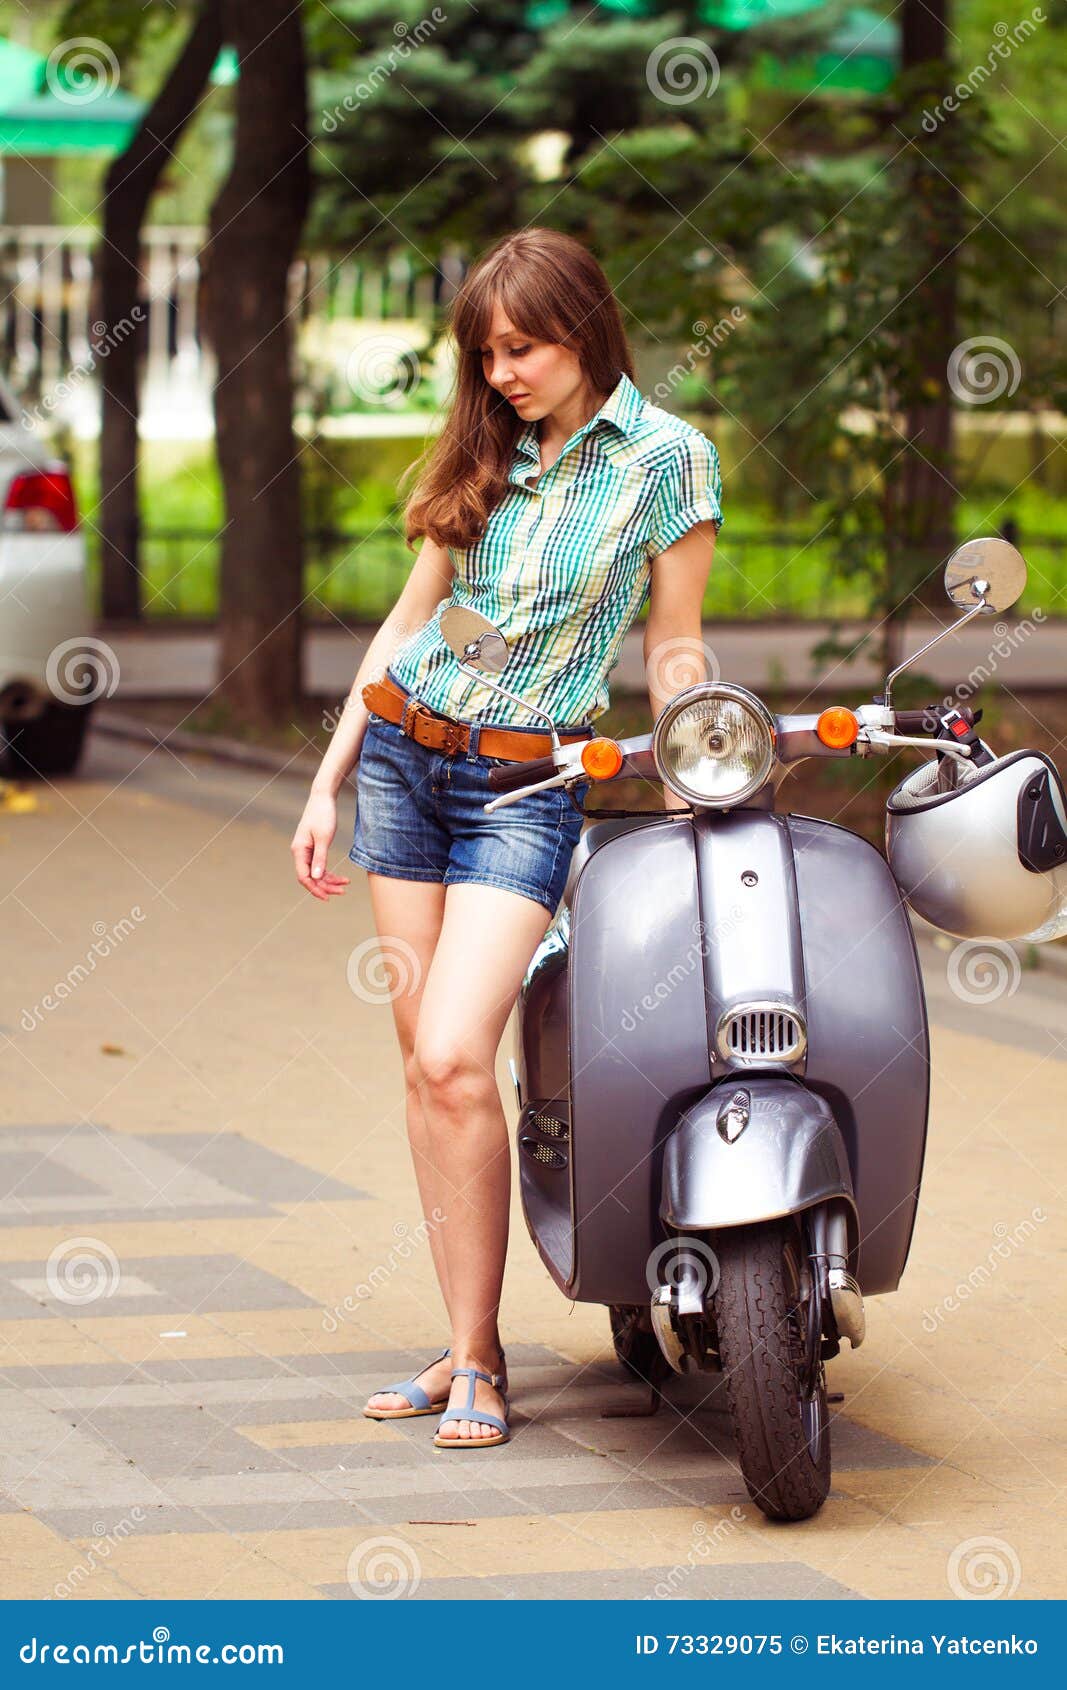 young beautiful woman poses near scooter city park summe rear view 73329075